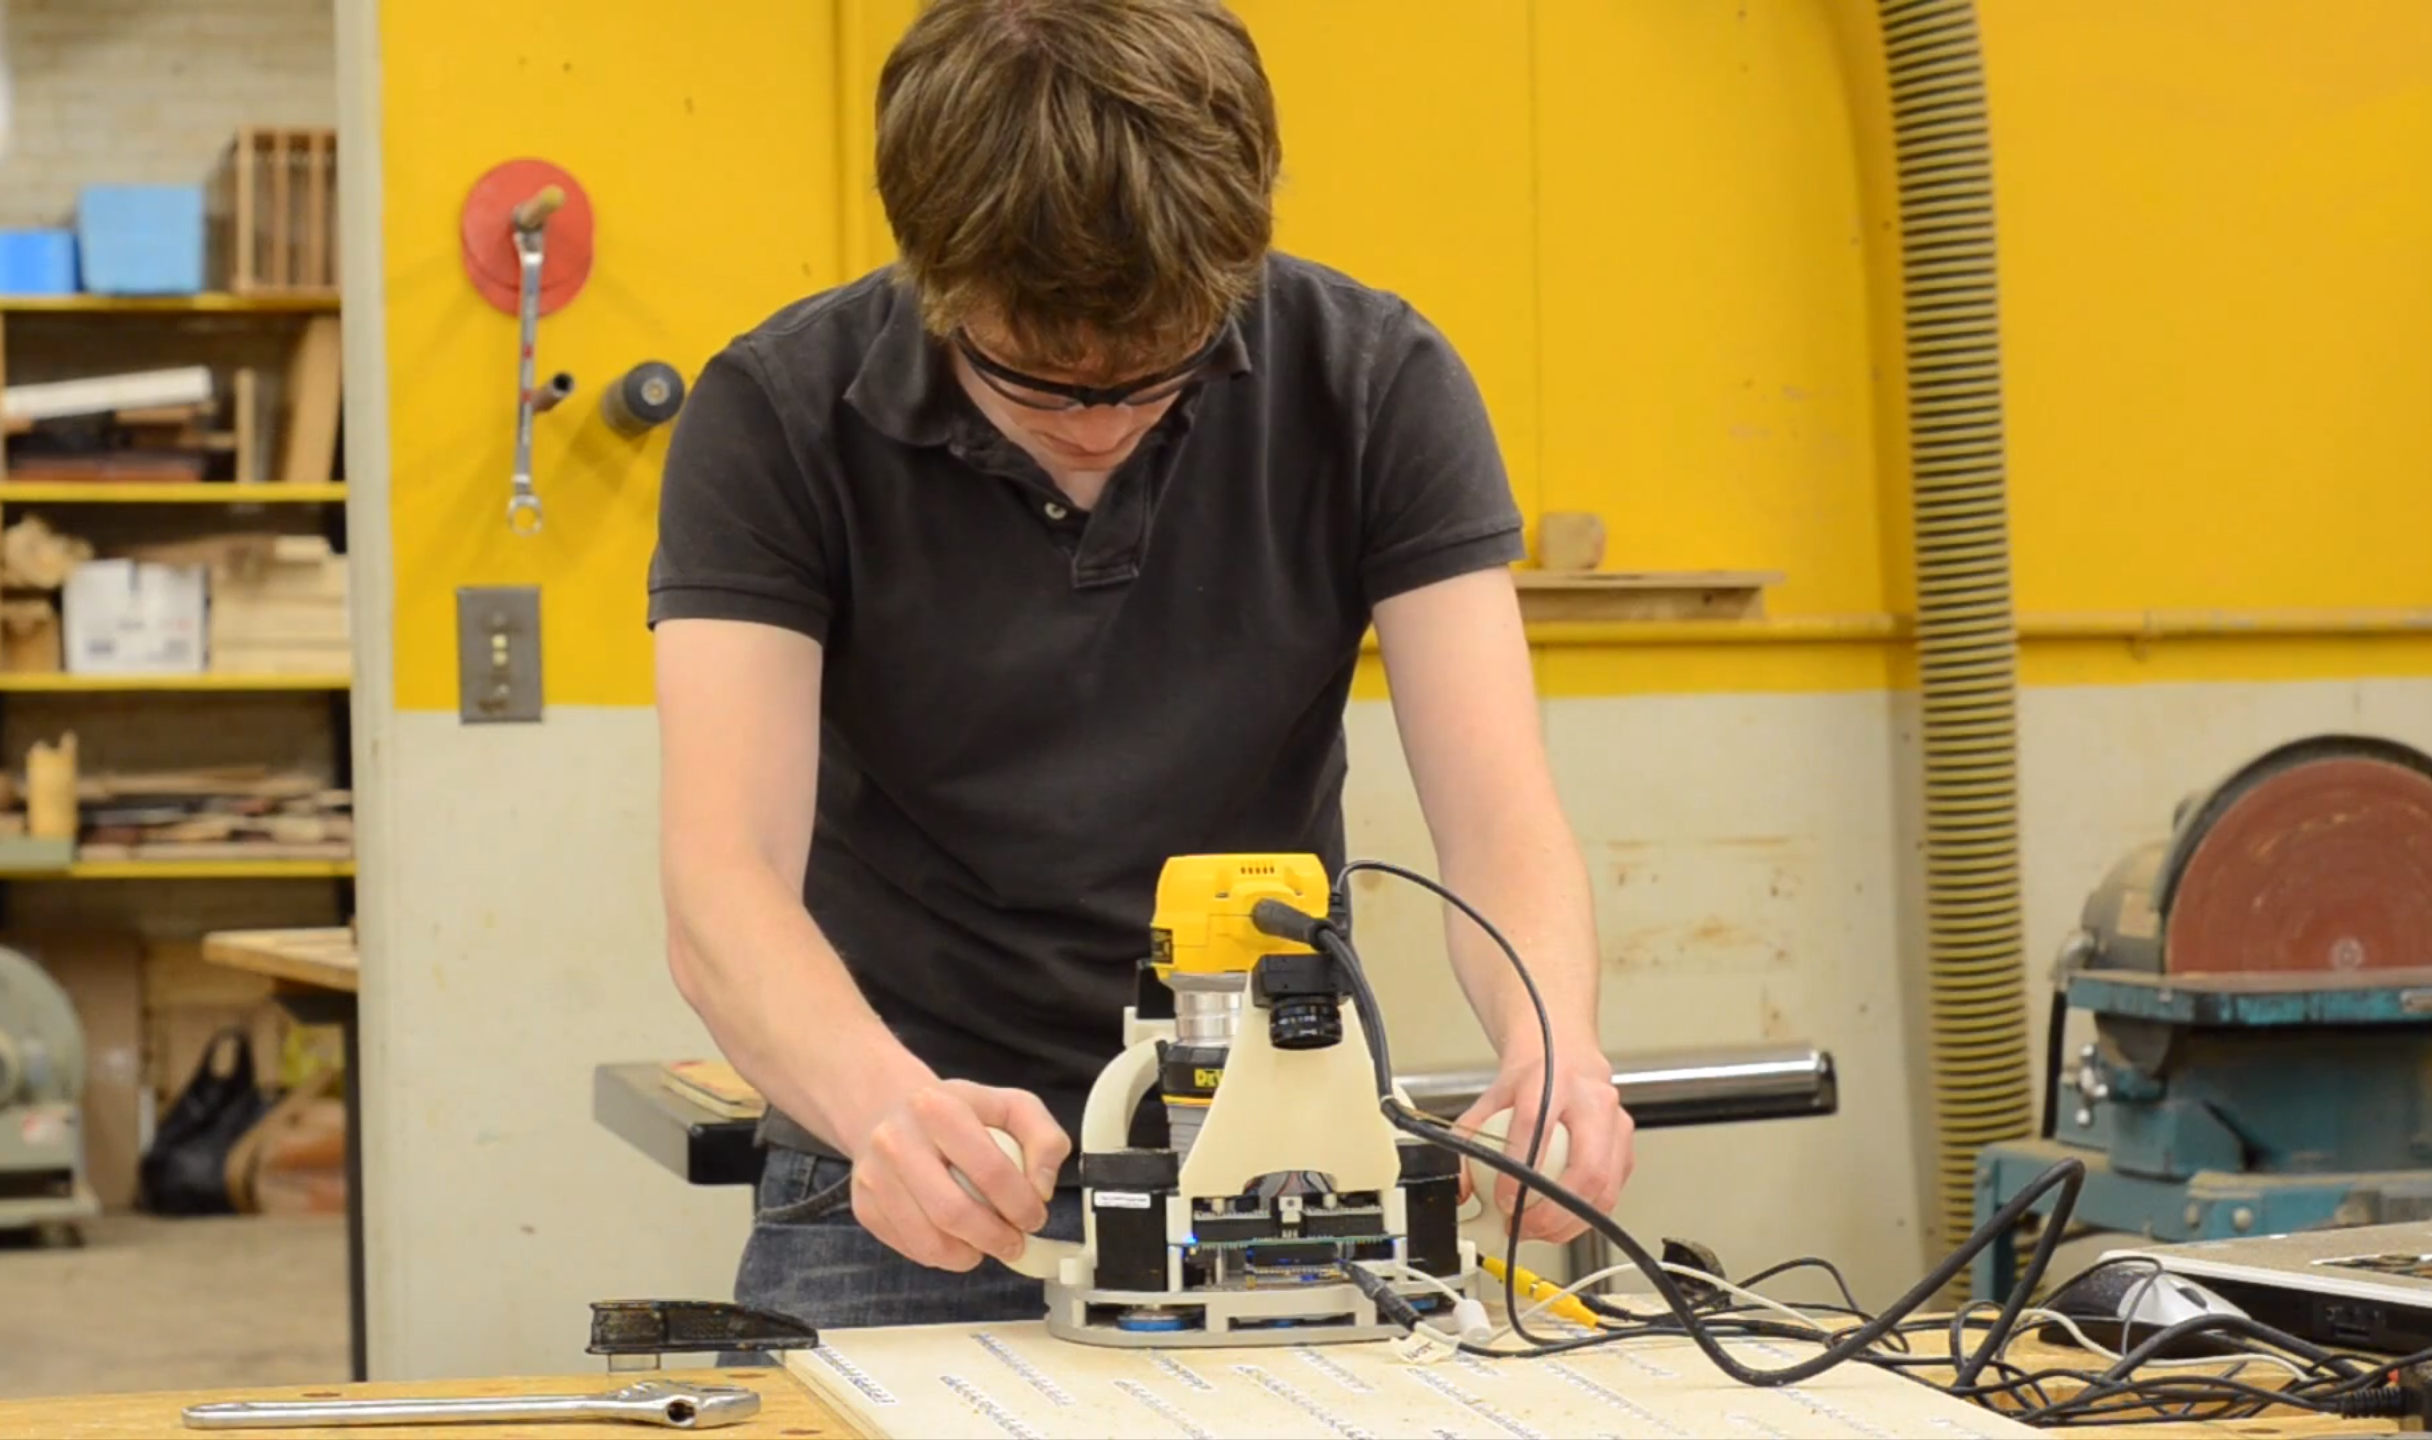 New Router Enhances The Precision Of Woodworking Mit News Massachusetts Institute Of Technology